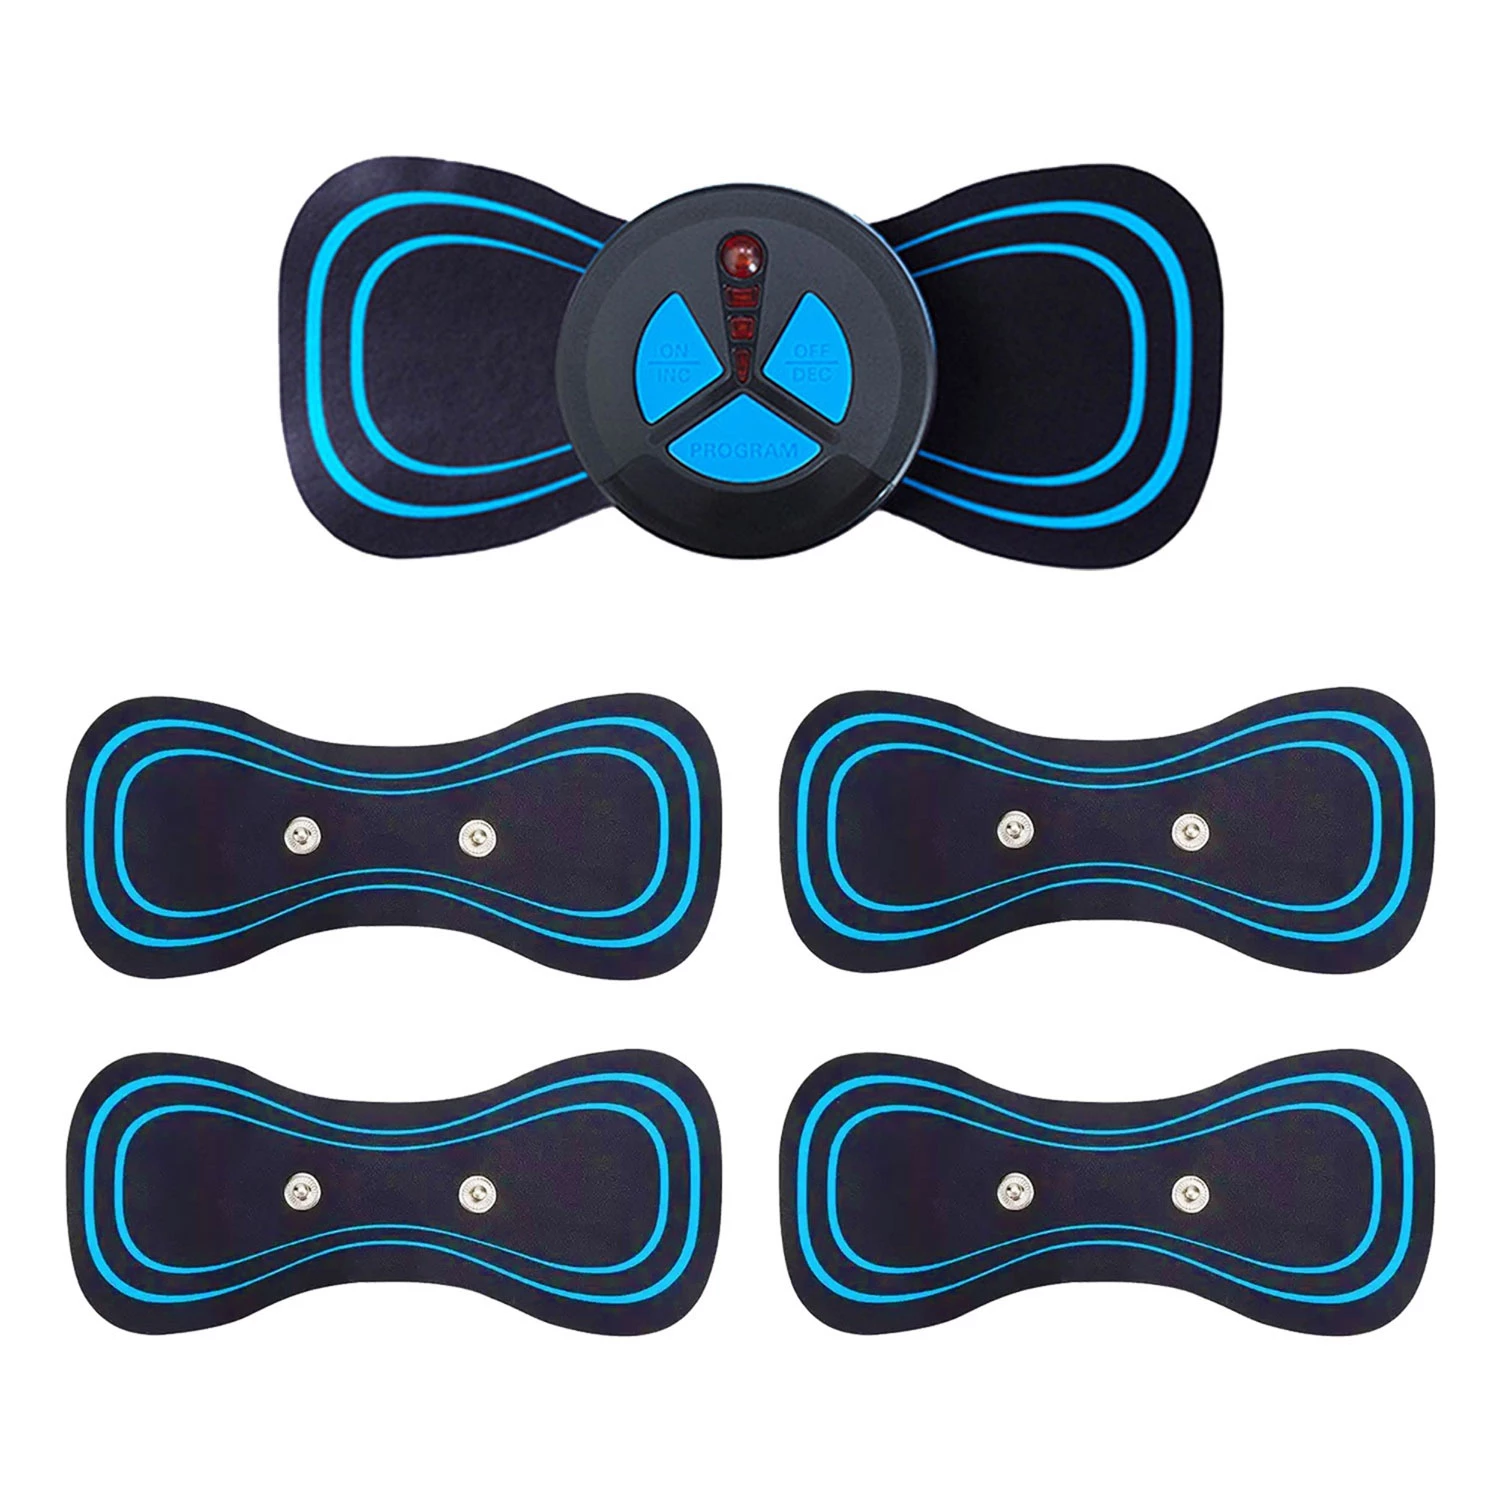 Portable Neck Massager Pads - 5 Pack, Reusable And Long-lasting